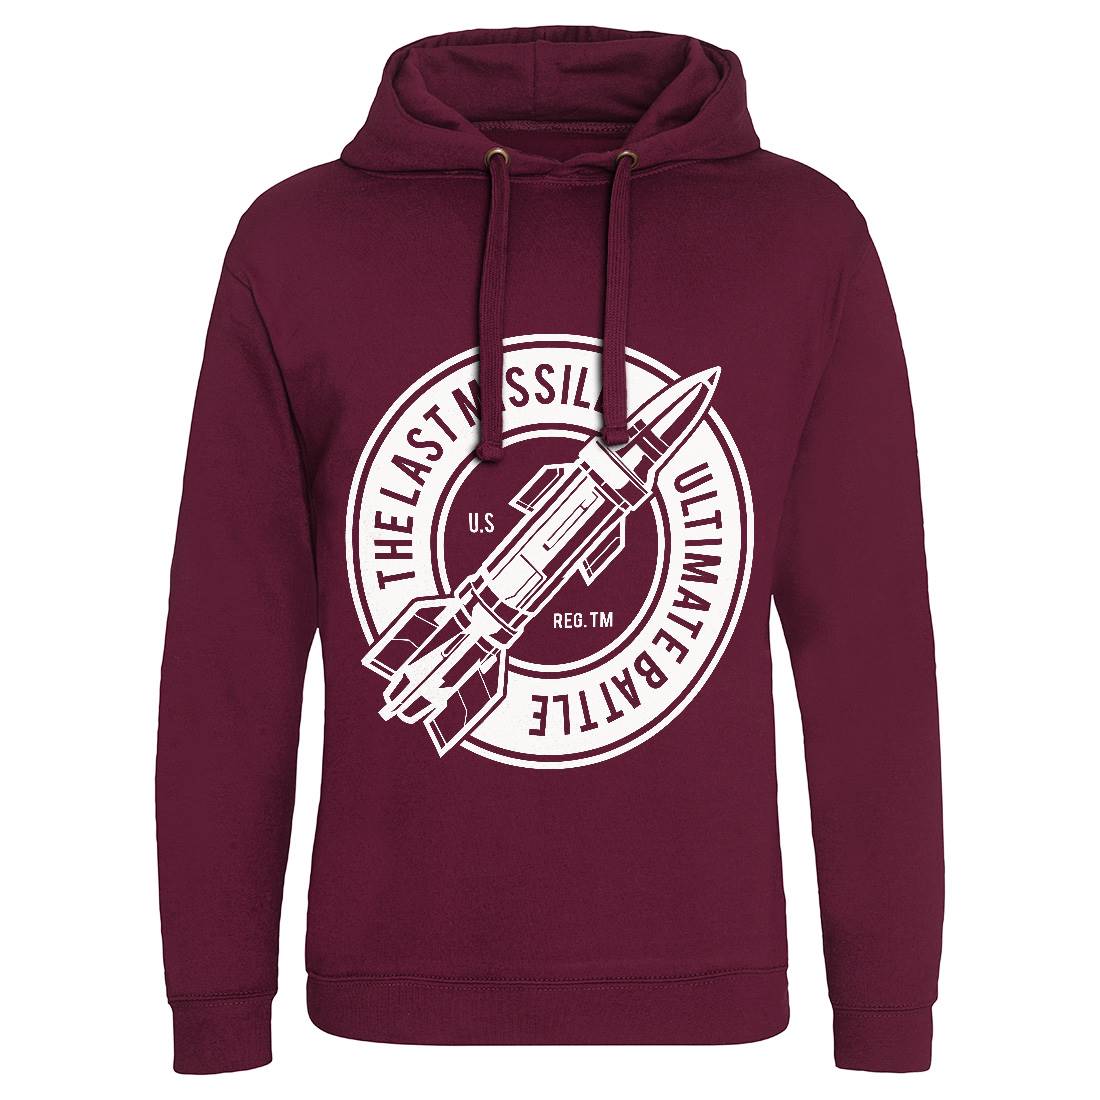 Last Missile Mens Hoodie Without Pocket Army A175